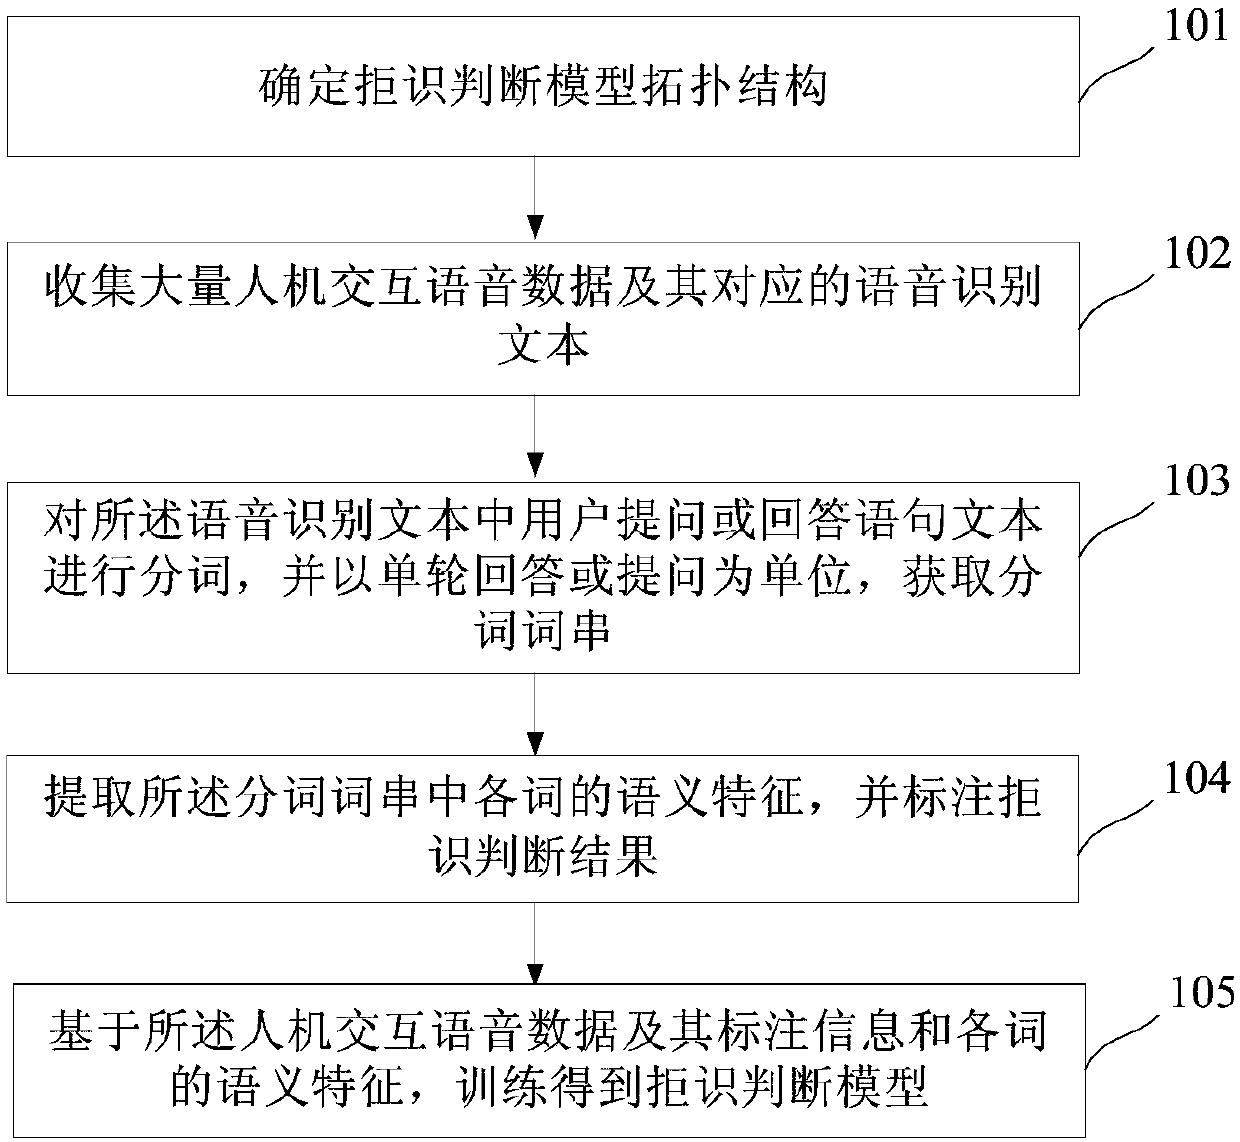 Smart voice interaction method and system